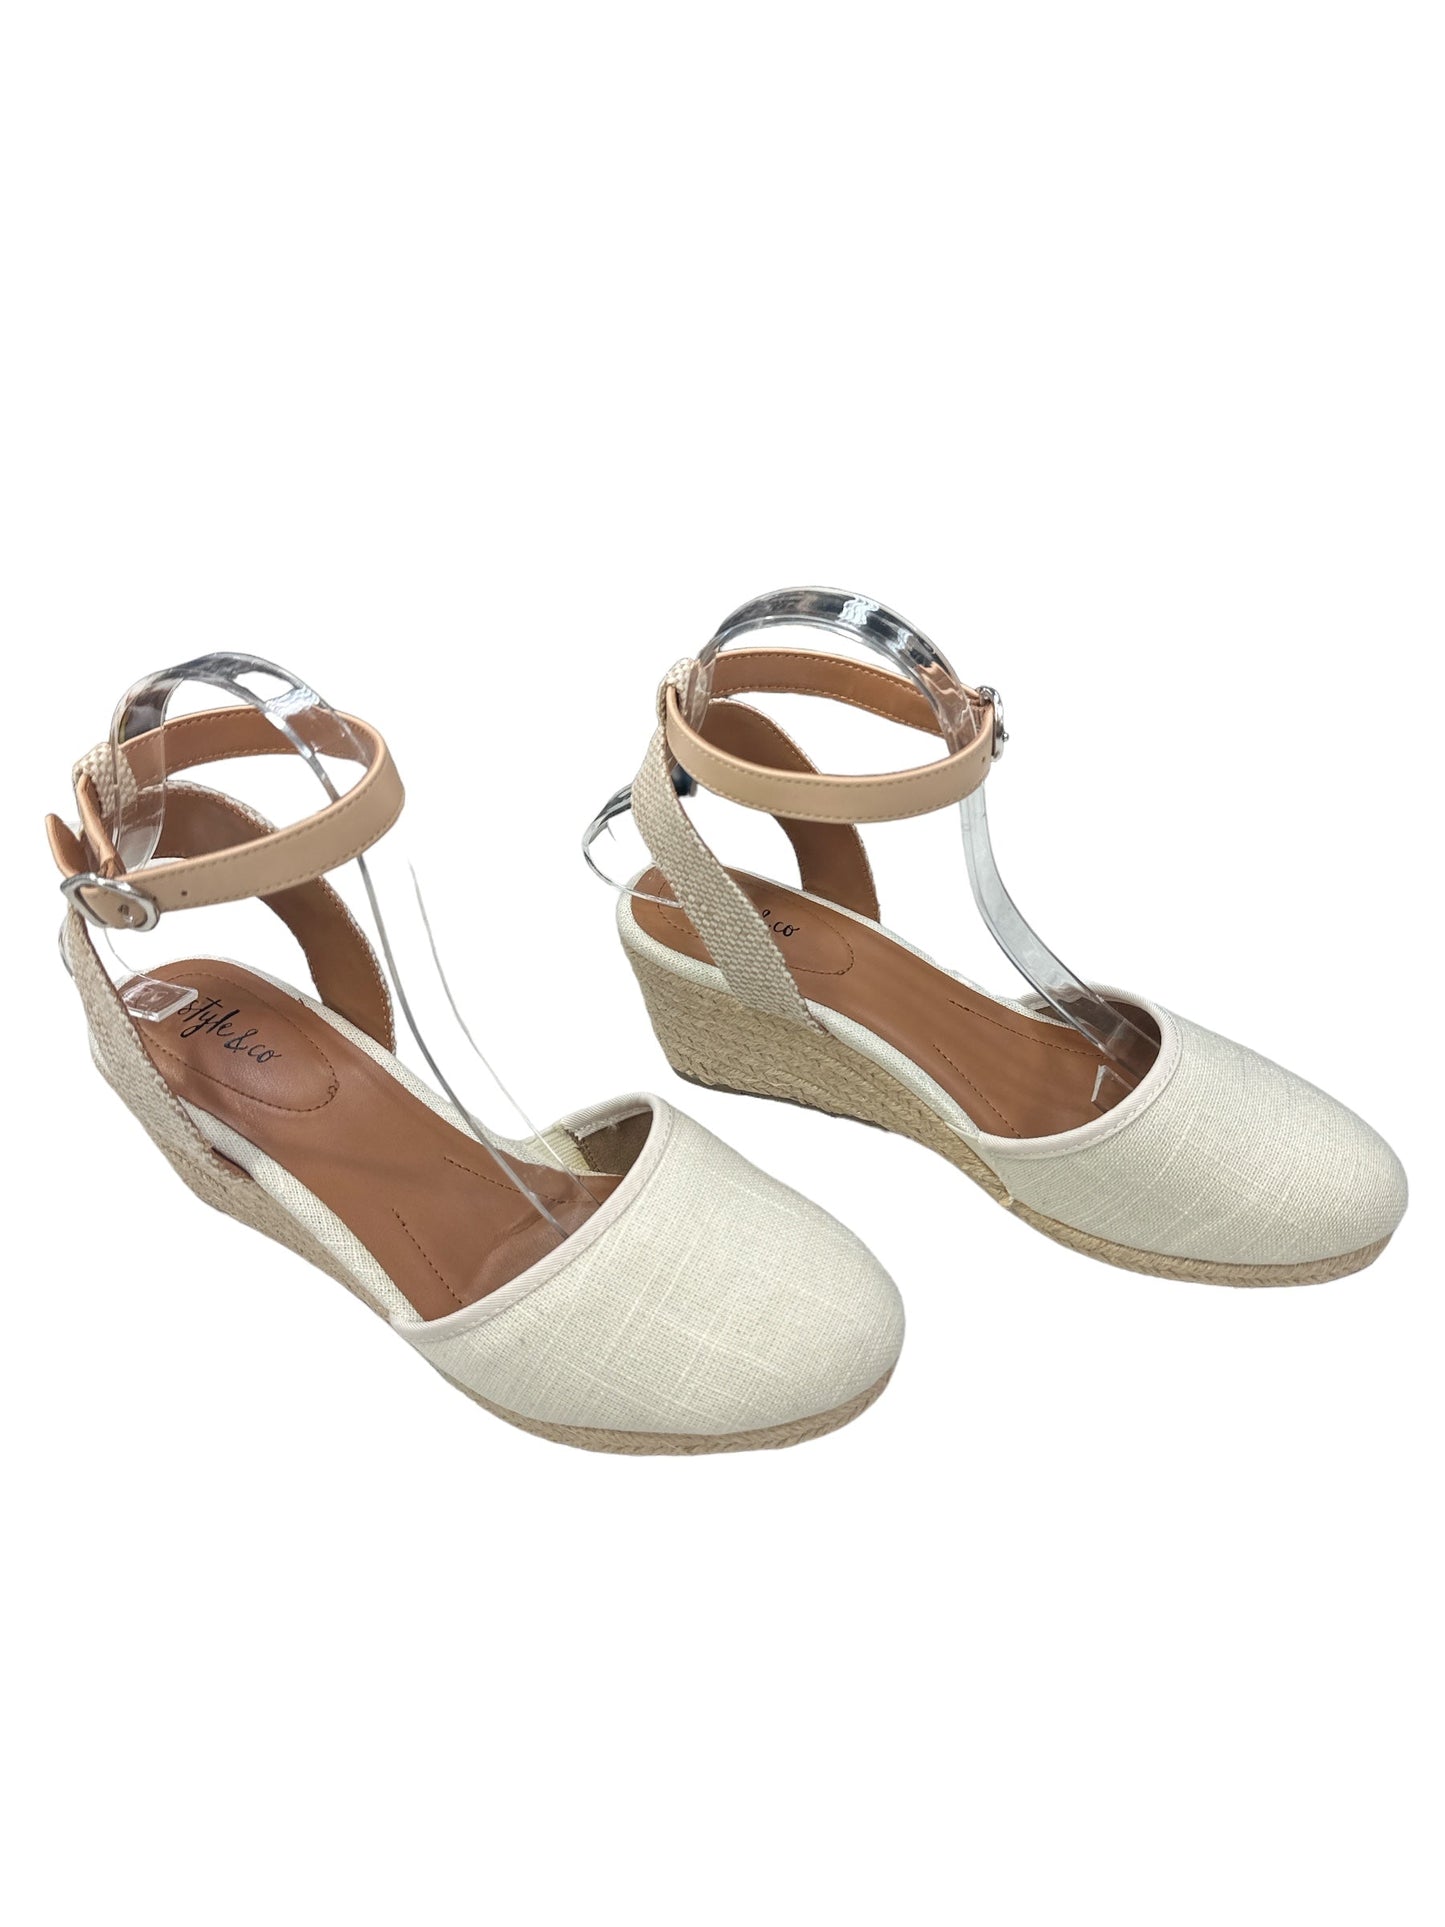 Cream Shoes Heels Platform Style And Company, Size 8.5